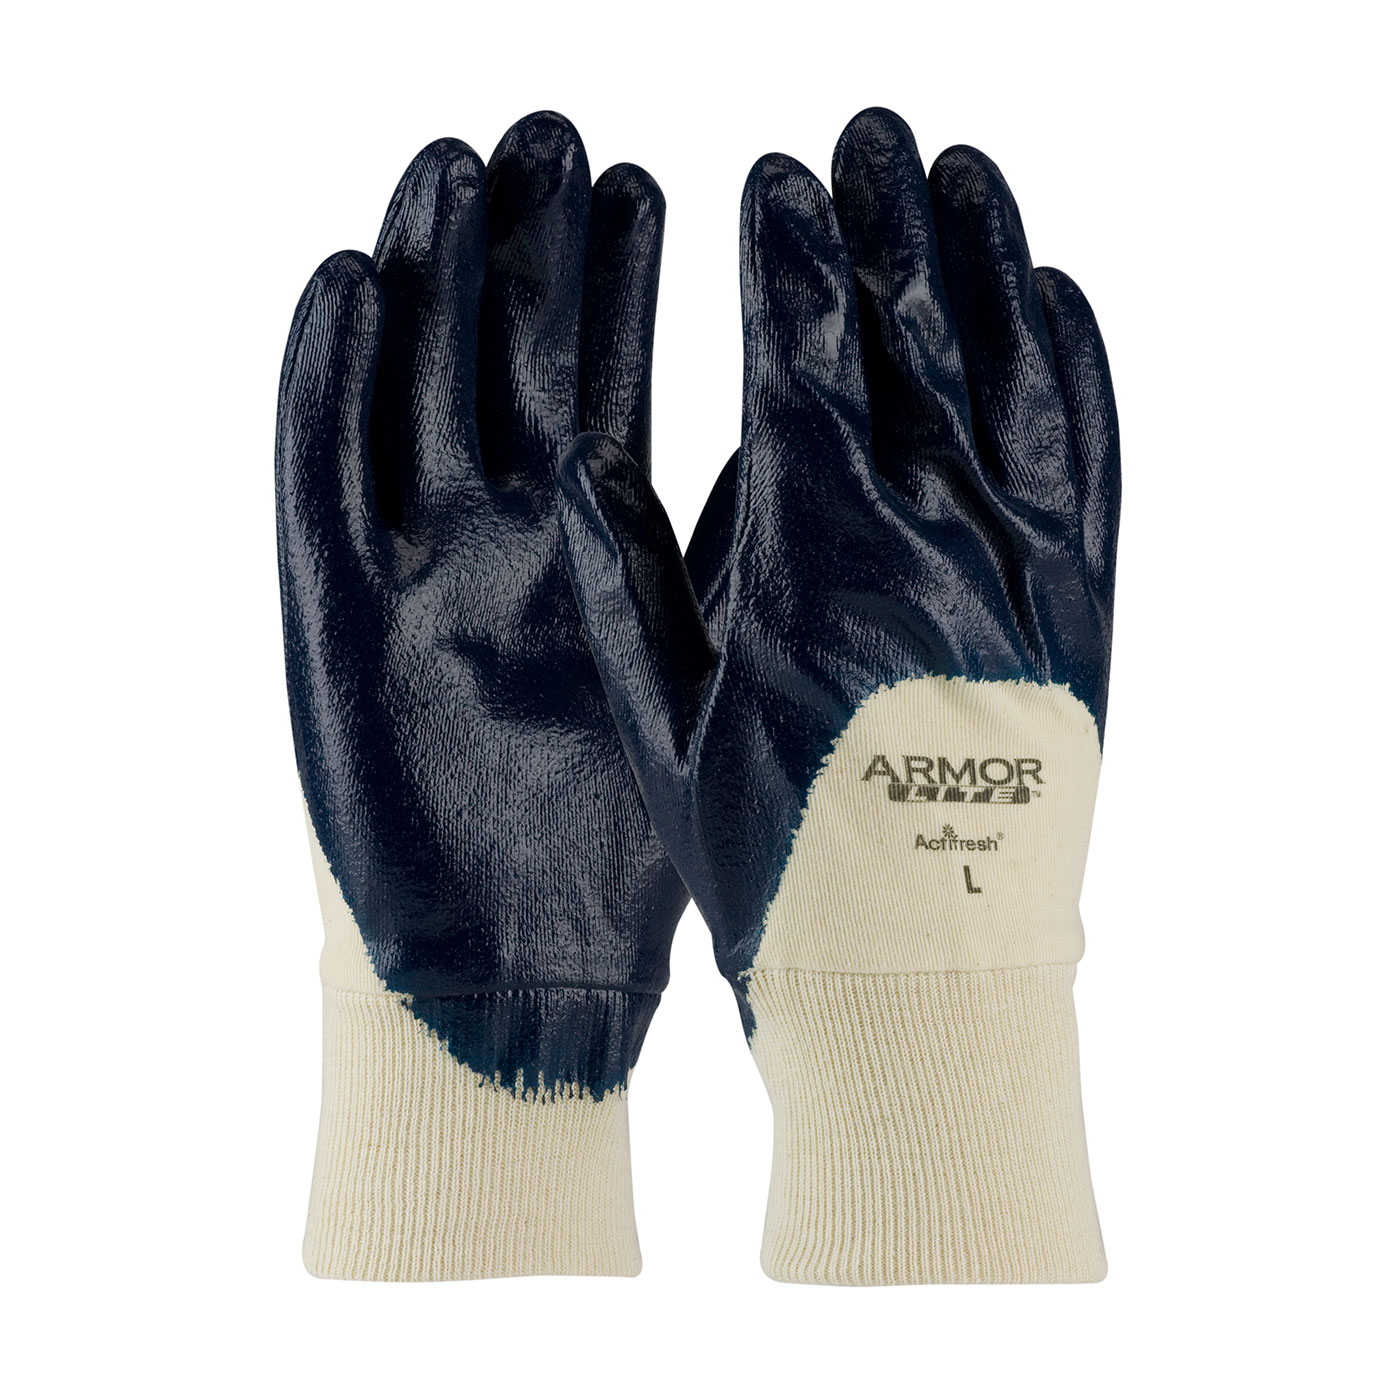 PIP 56-3170/XL ArmorLite Nitrile Dipped Glove with Interlock Liner and Textured Finish on Palm, Fingers & Knuckles - Knitwrist - X-Large PID-56 3170 XL